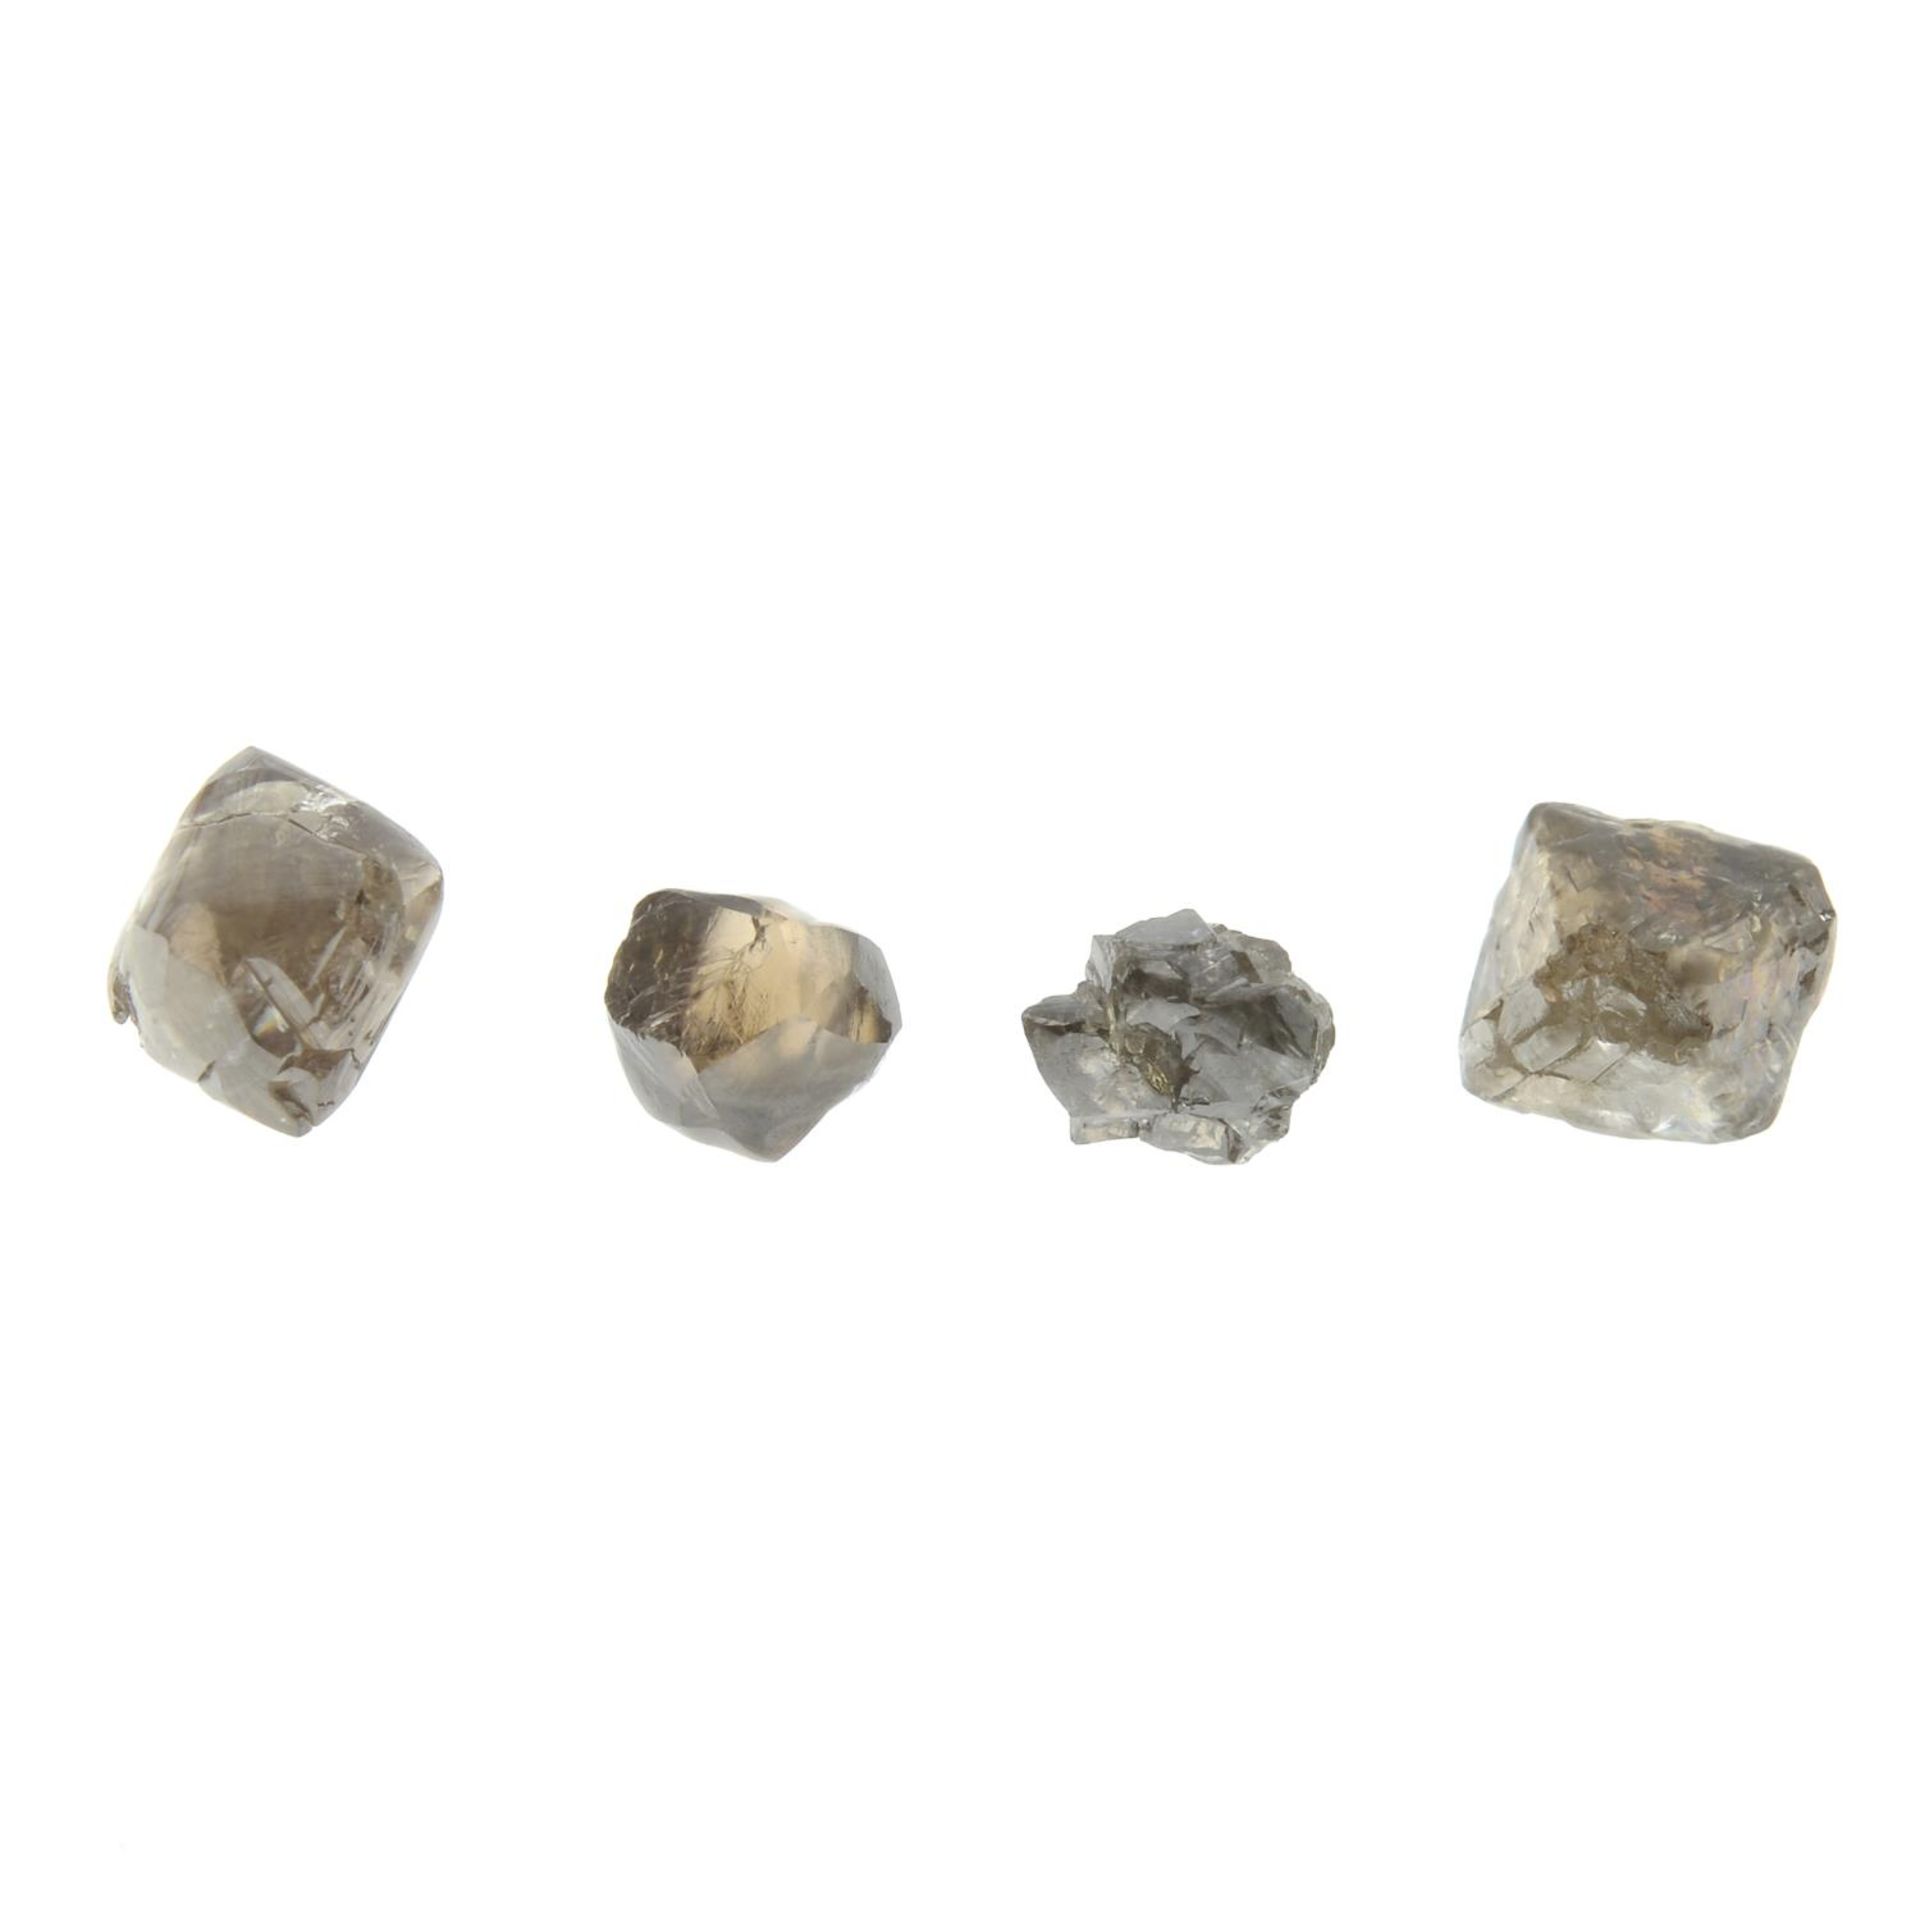 A selection of rough diamond crystals.